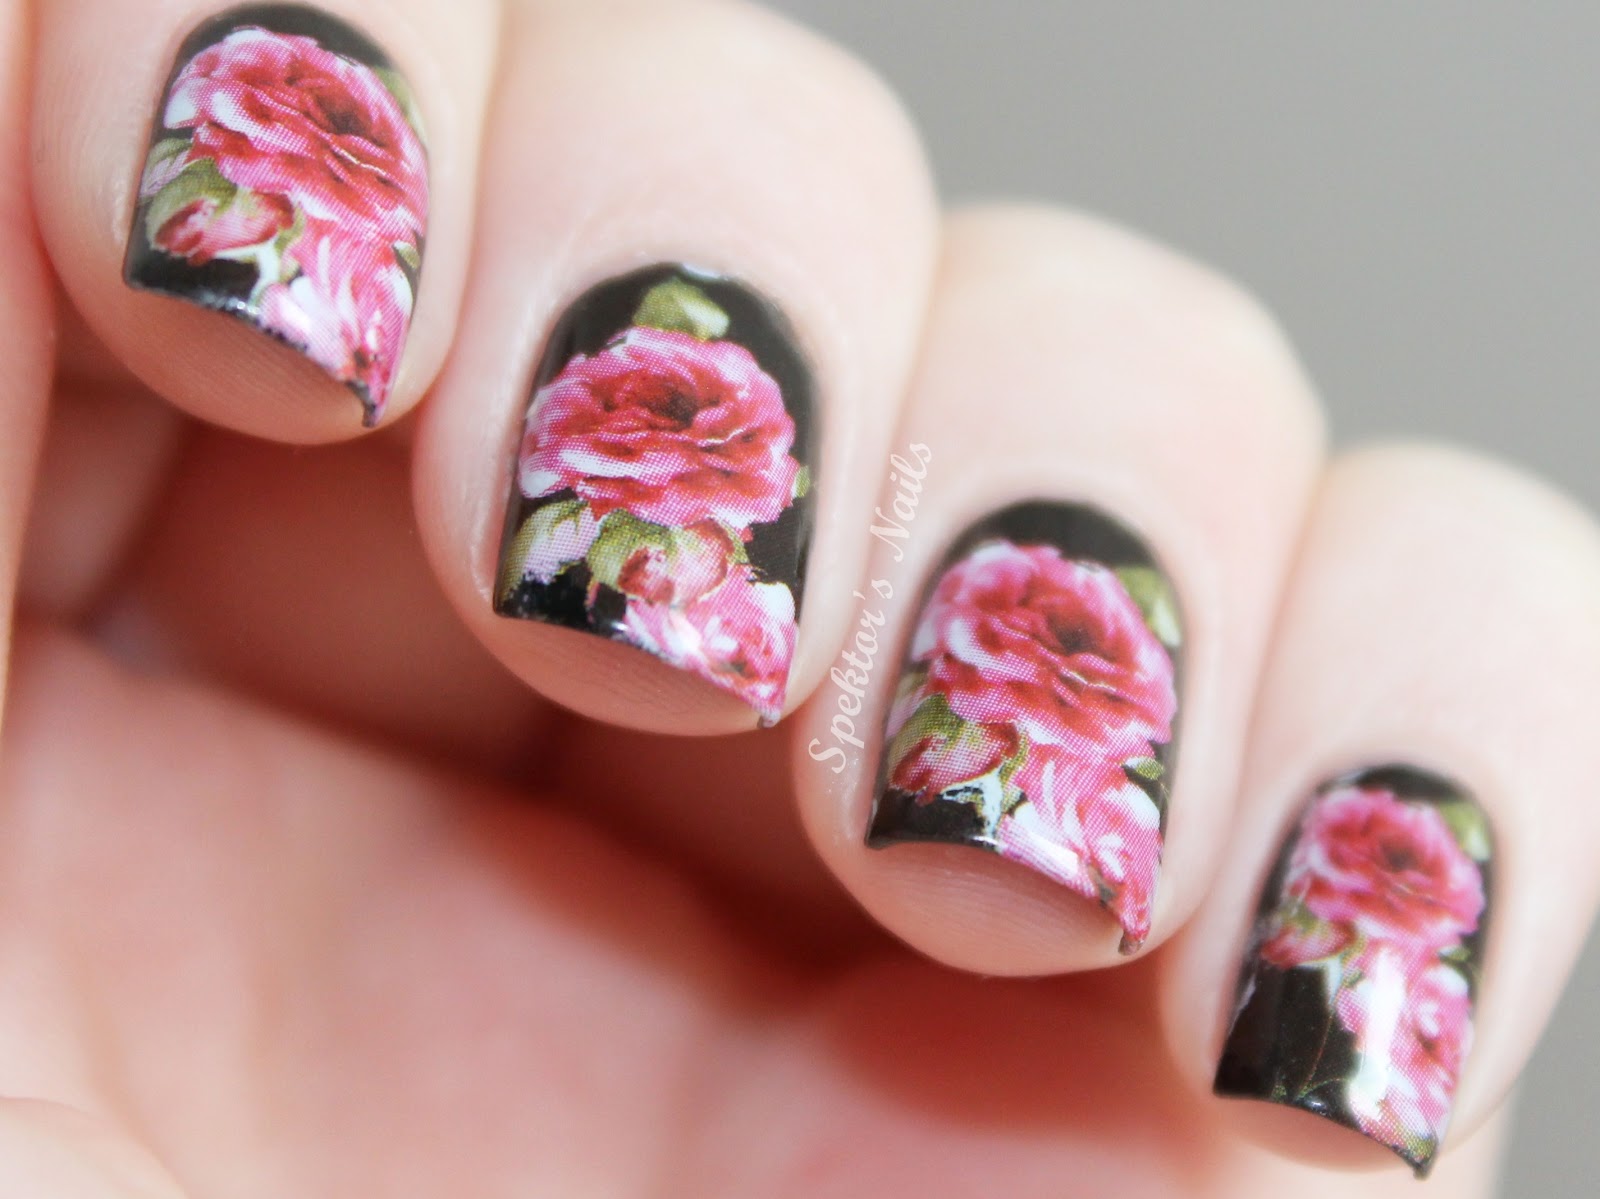 5. Tips and Tricks for Perfectly Applying Water Decals on Nails - wide 6